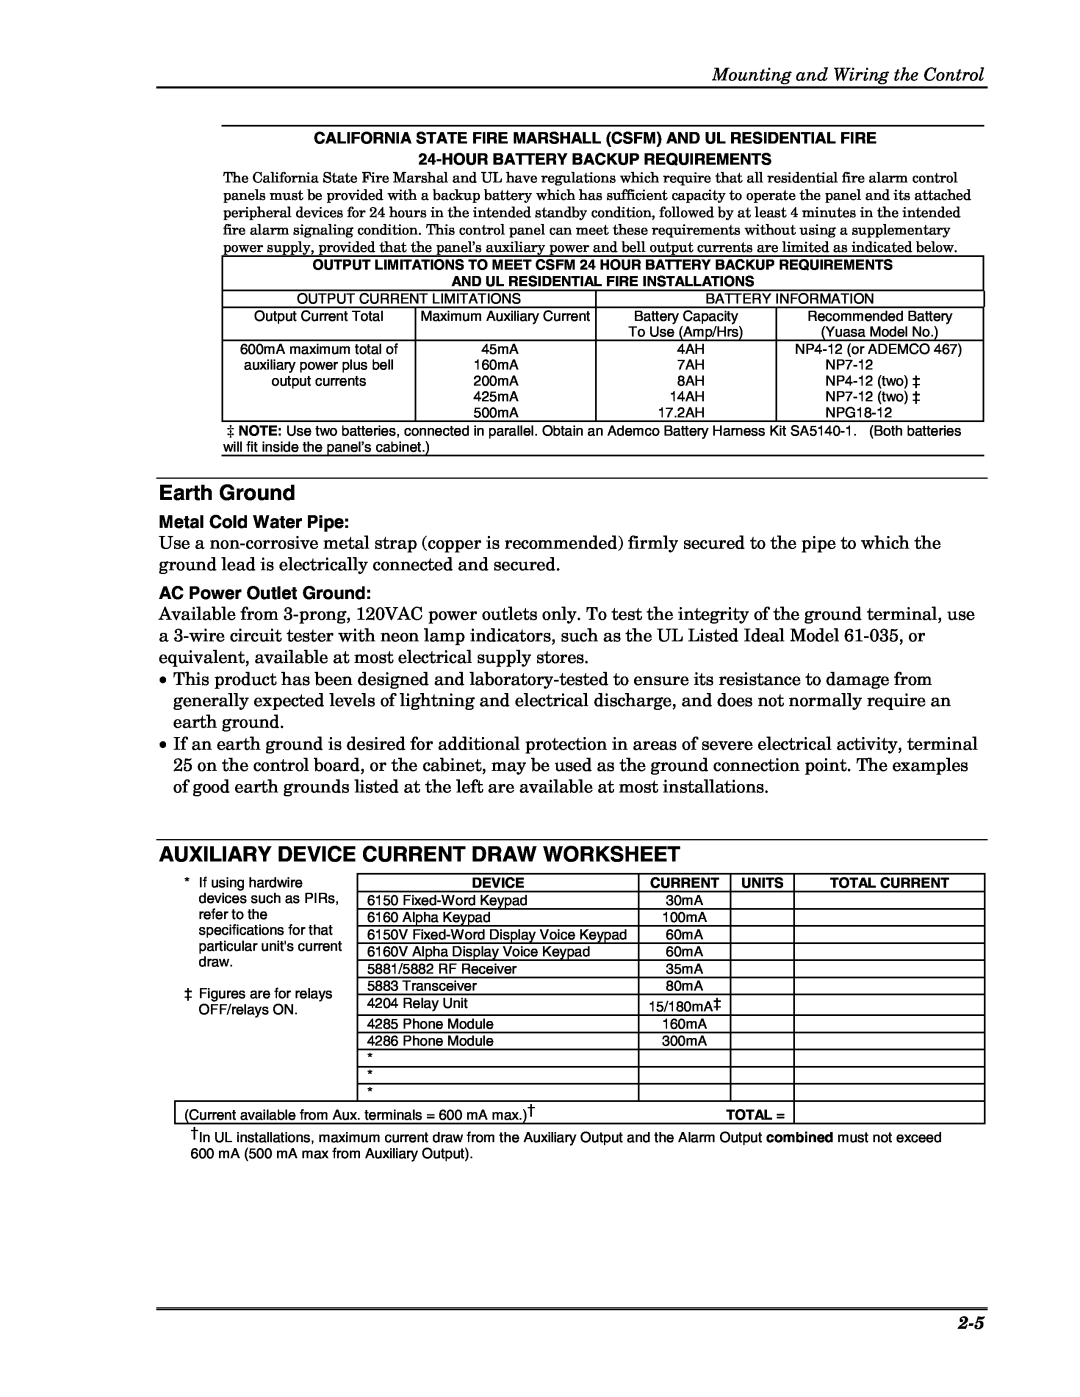 Honeywell Ademco Security Systems Earth Ground, Auxiliary Device Current Draw Worksheet, Mounting and Wiring the Control 